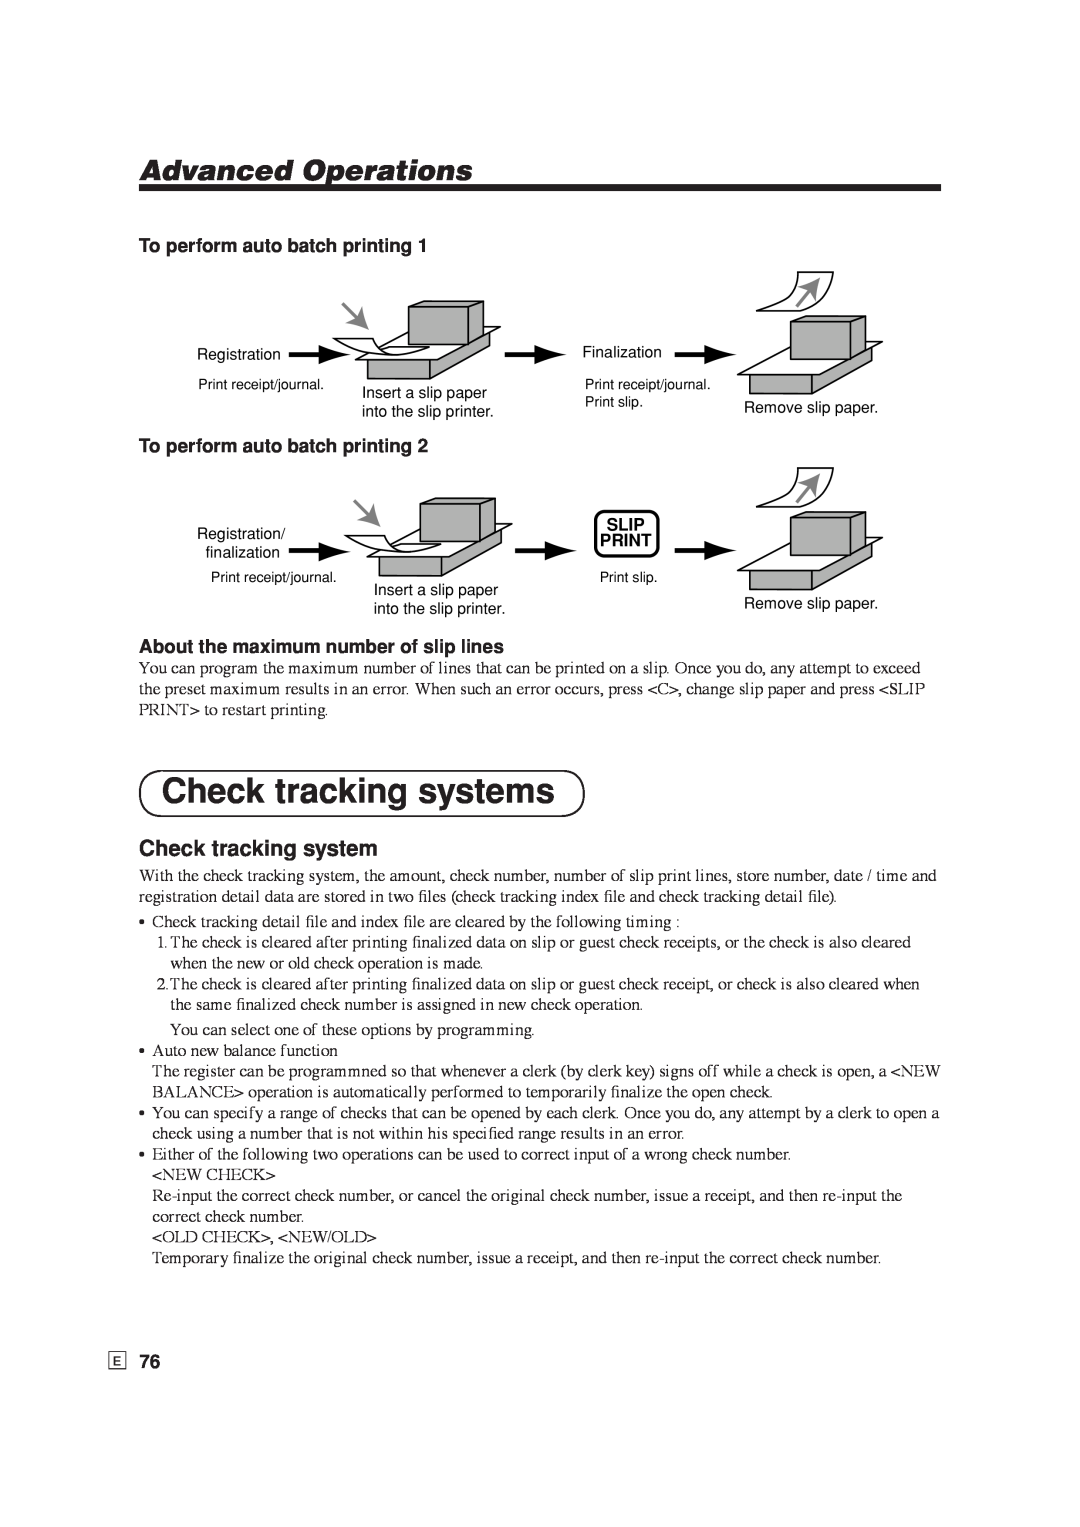 Casio SE-S6000 Check tracking systems, To perform auto batch printing, About the maximum number of slip lines, Slip Print 